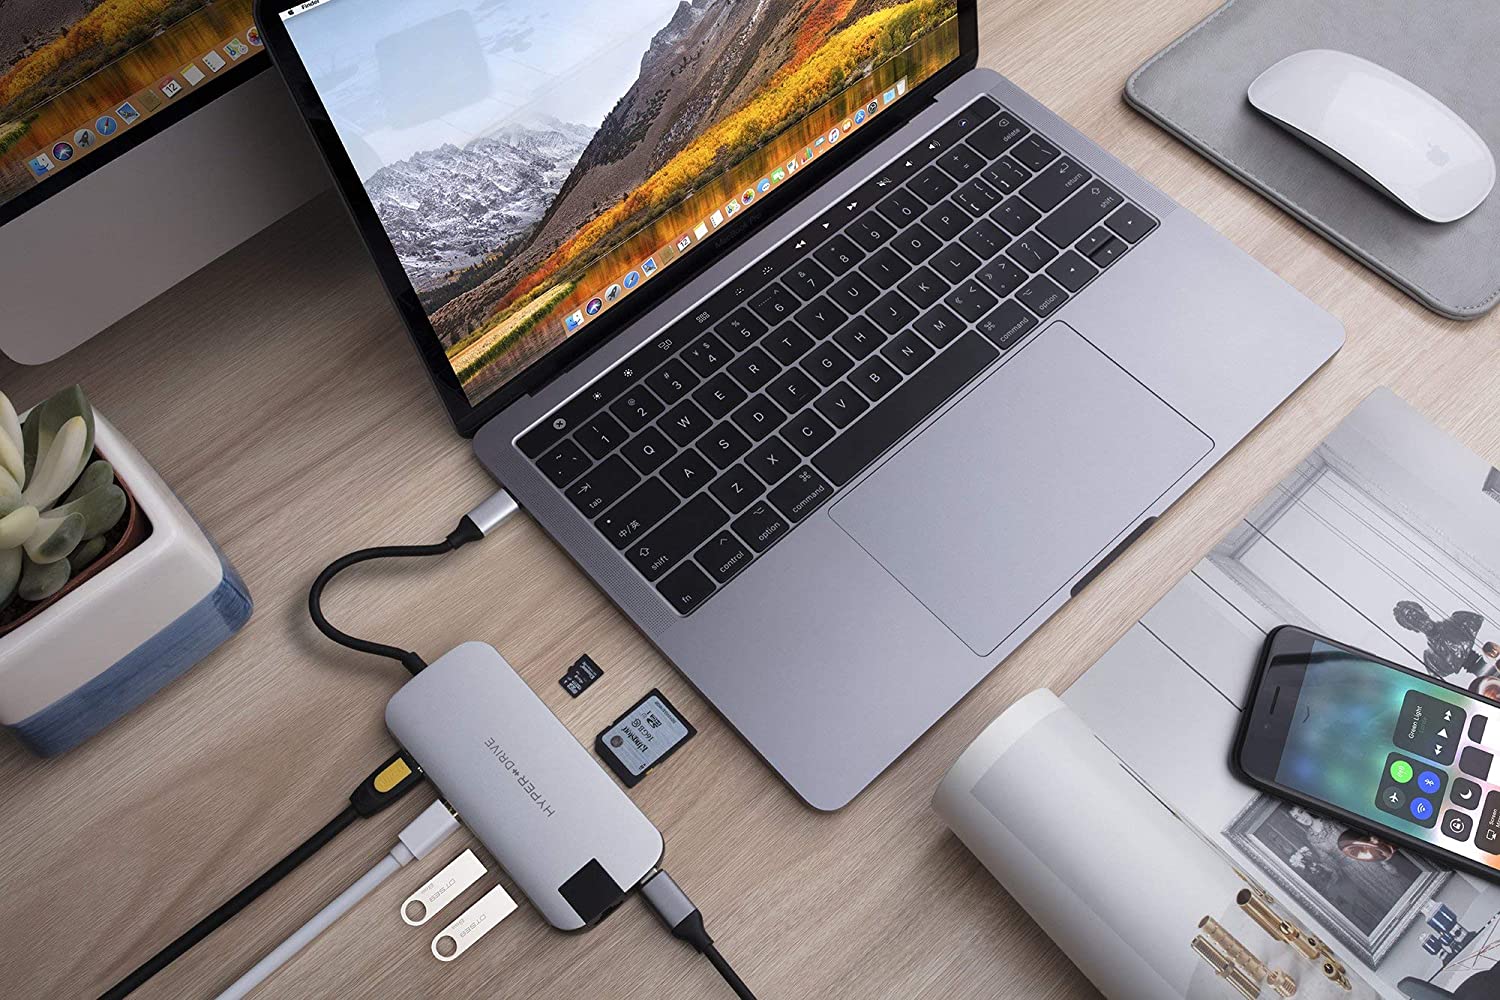 HyperDrive SLIM 8-in-1 USB-C Hub for Macbook & USB-C Devices - Space Grey HD247B-GRAY Details